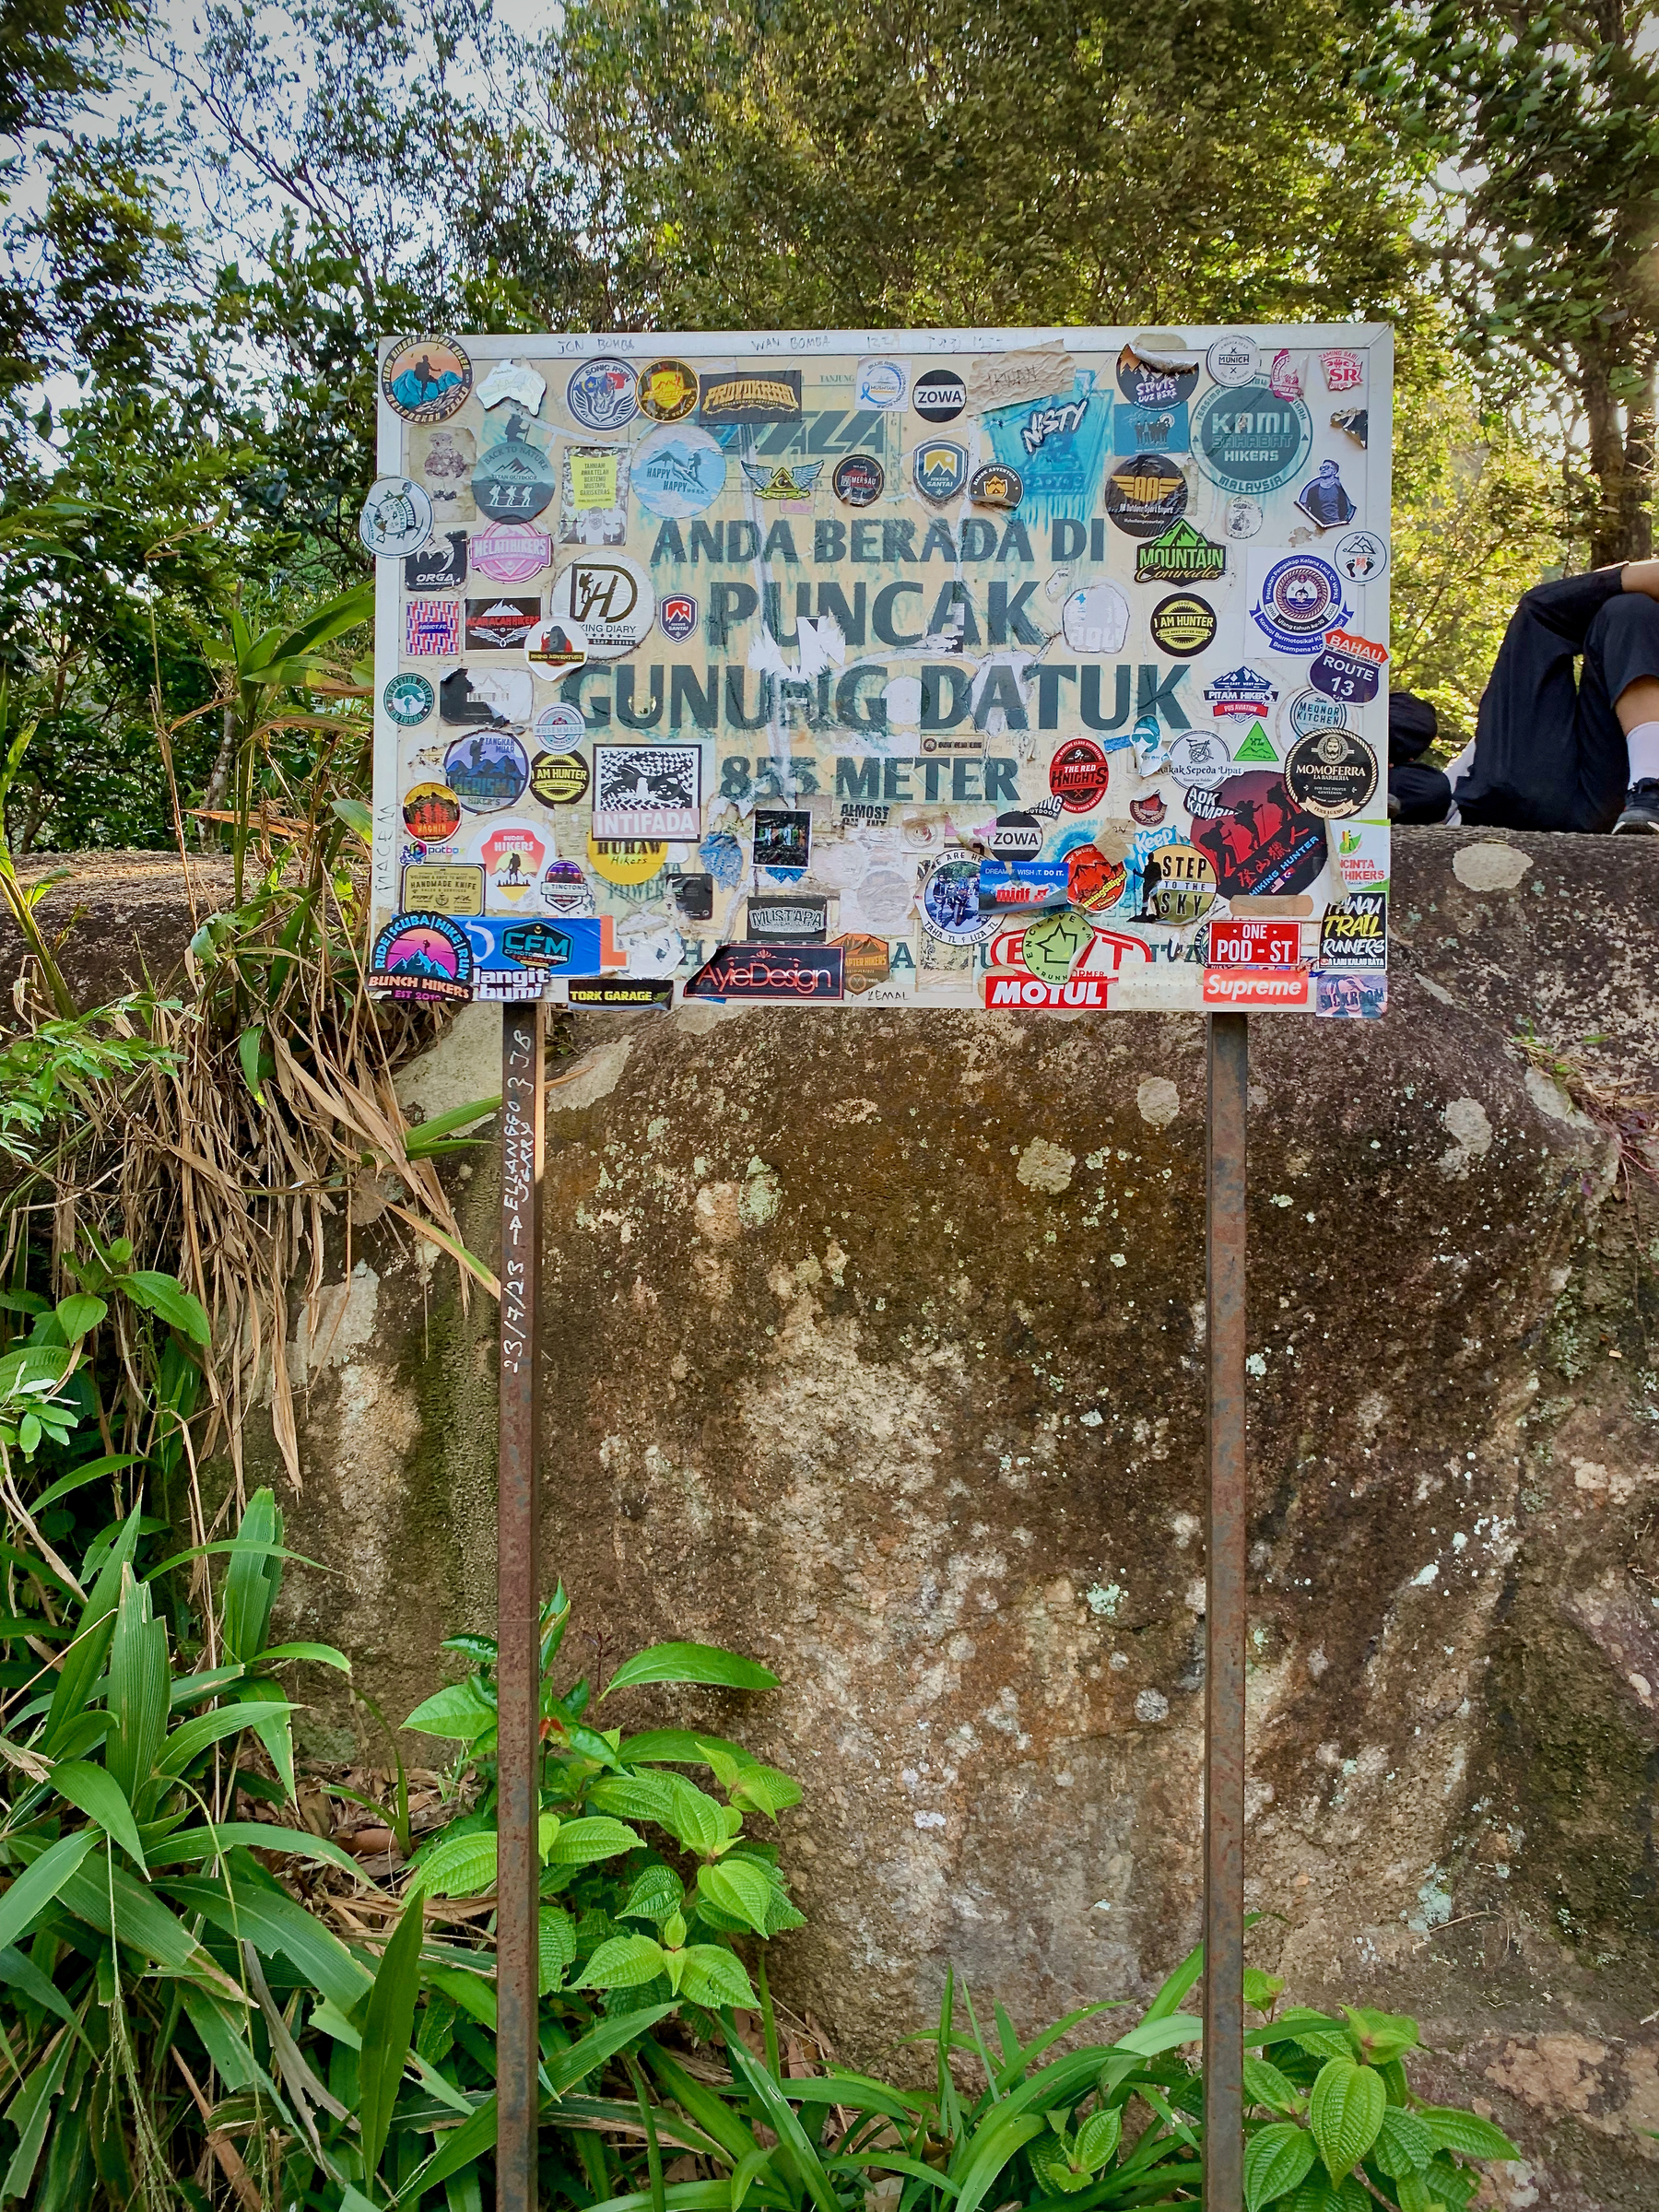 A board at the summit of Gunung Datuk stating that you are there